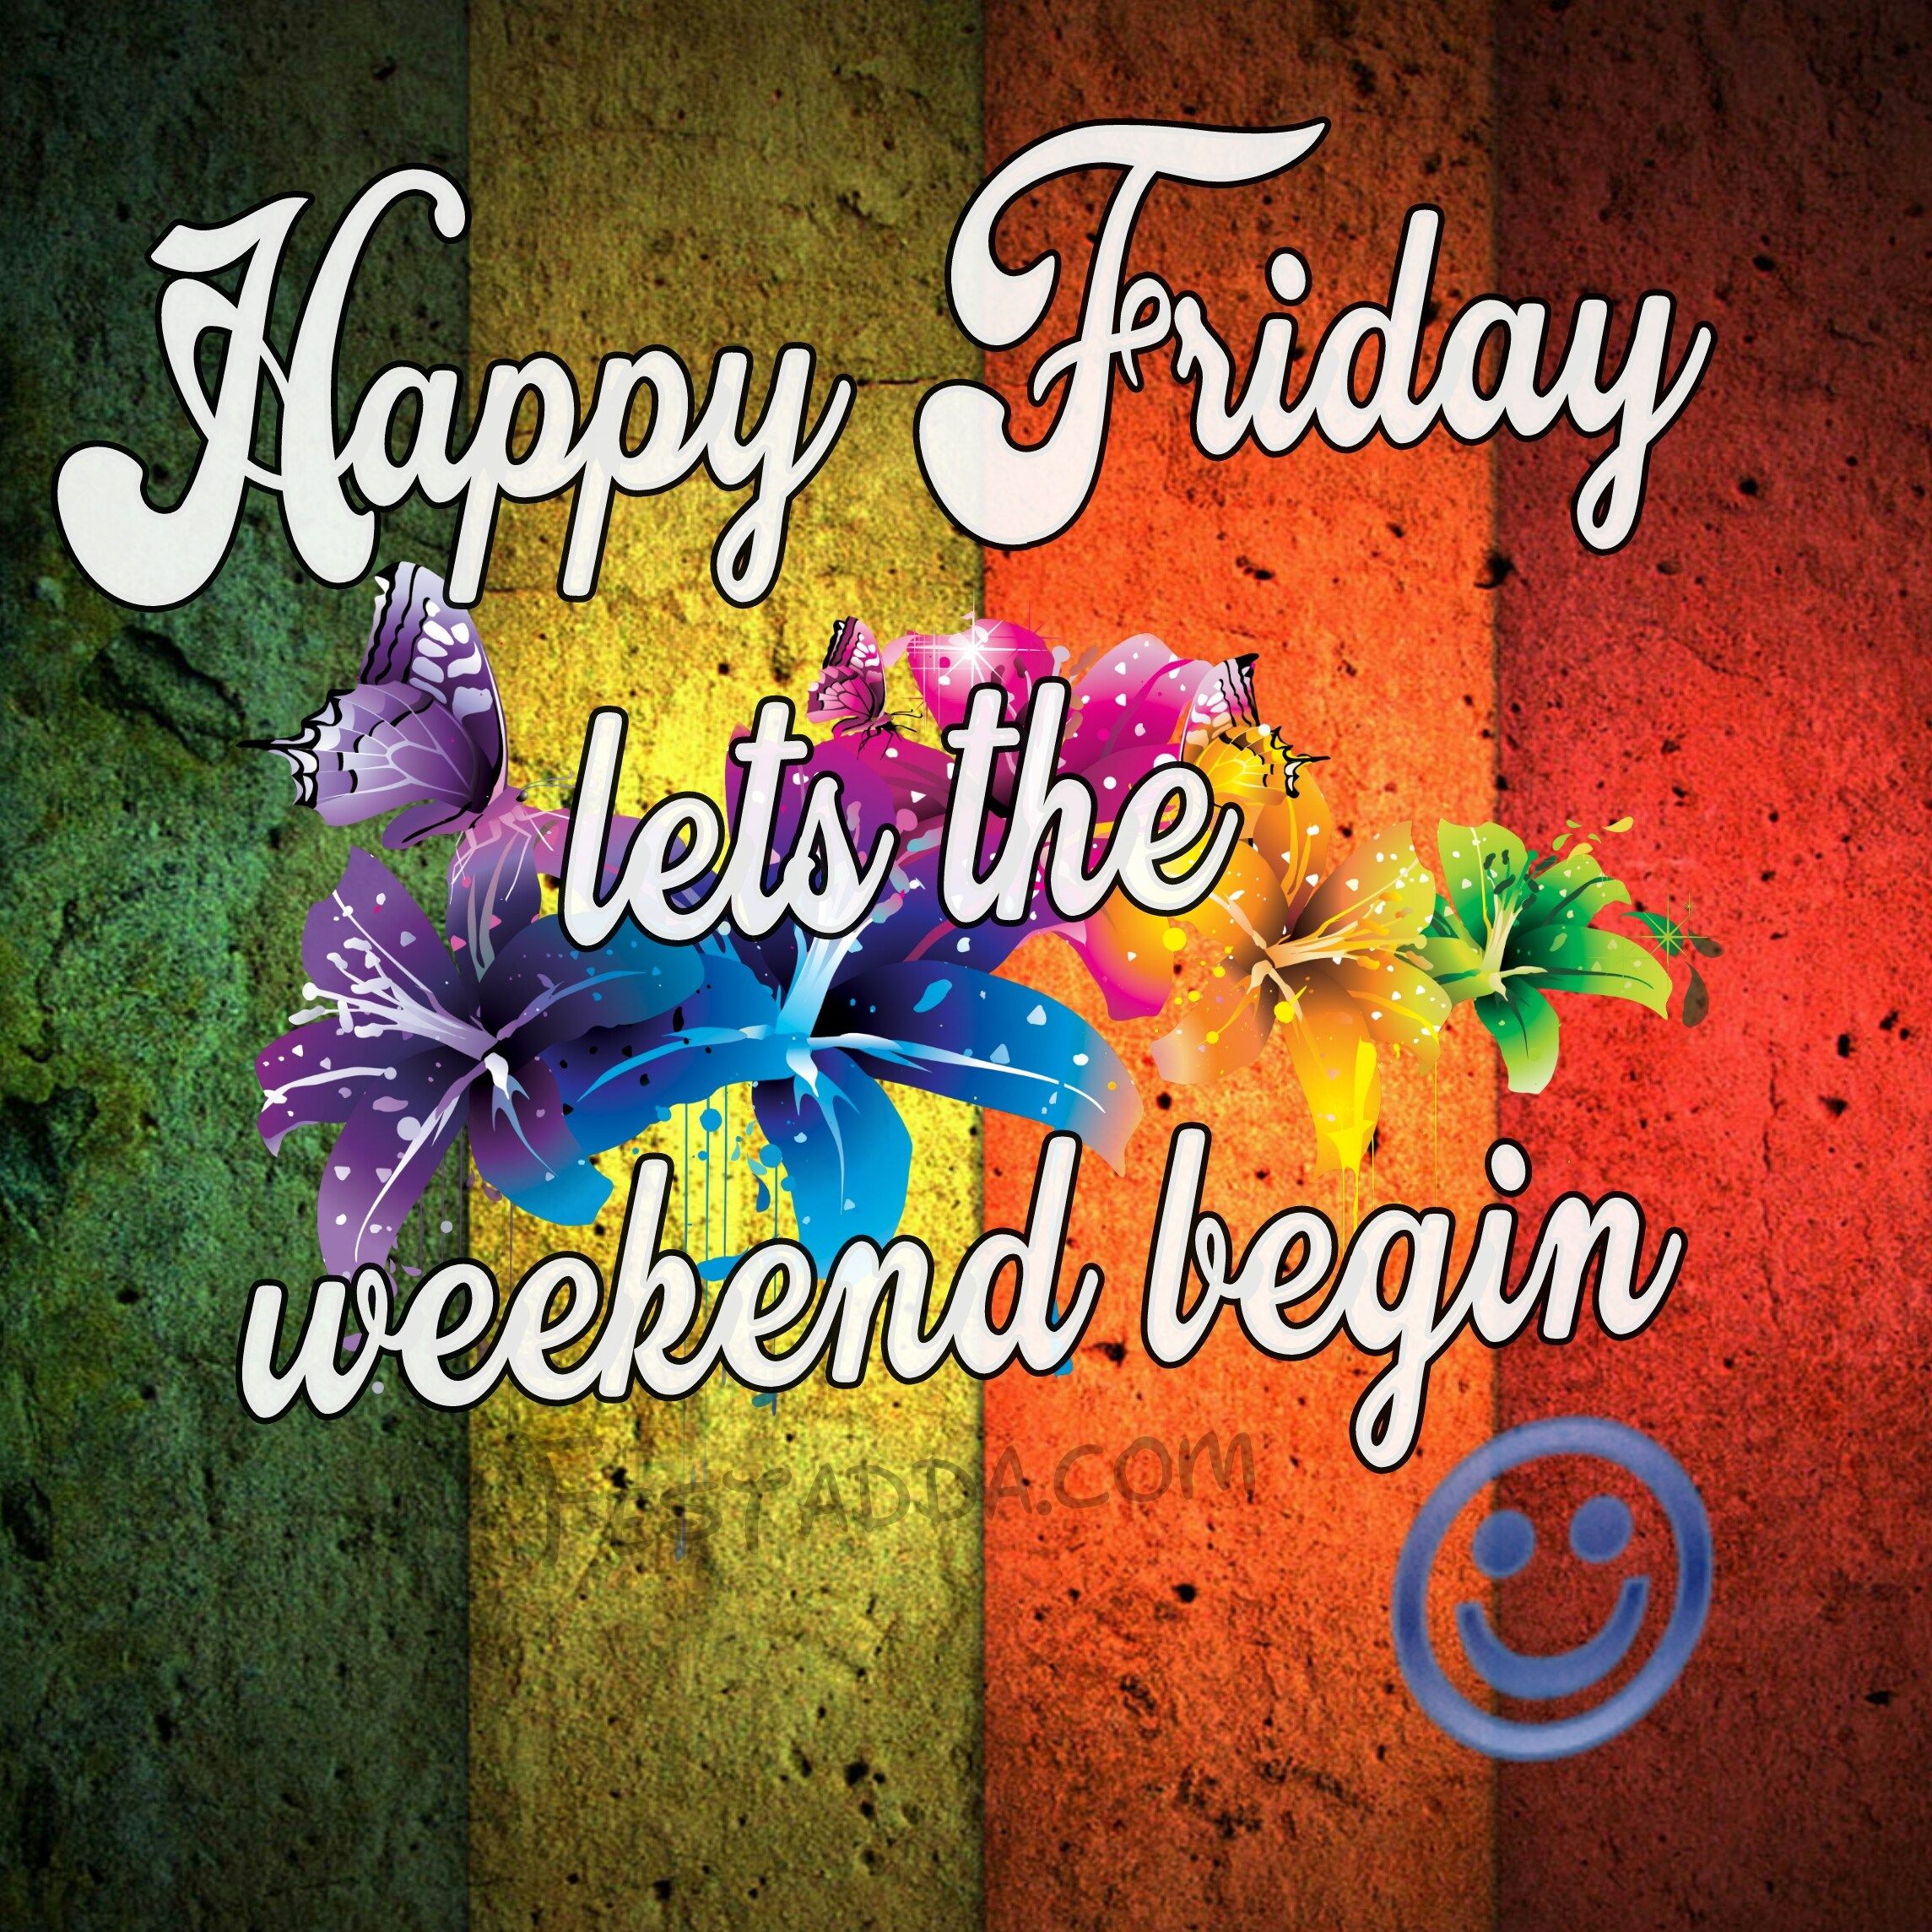 Happy Friday Weekend Friday images - Happy Friday Weekend Friday images